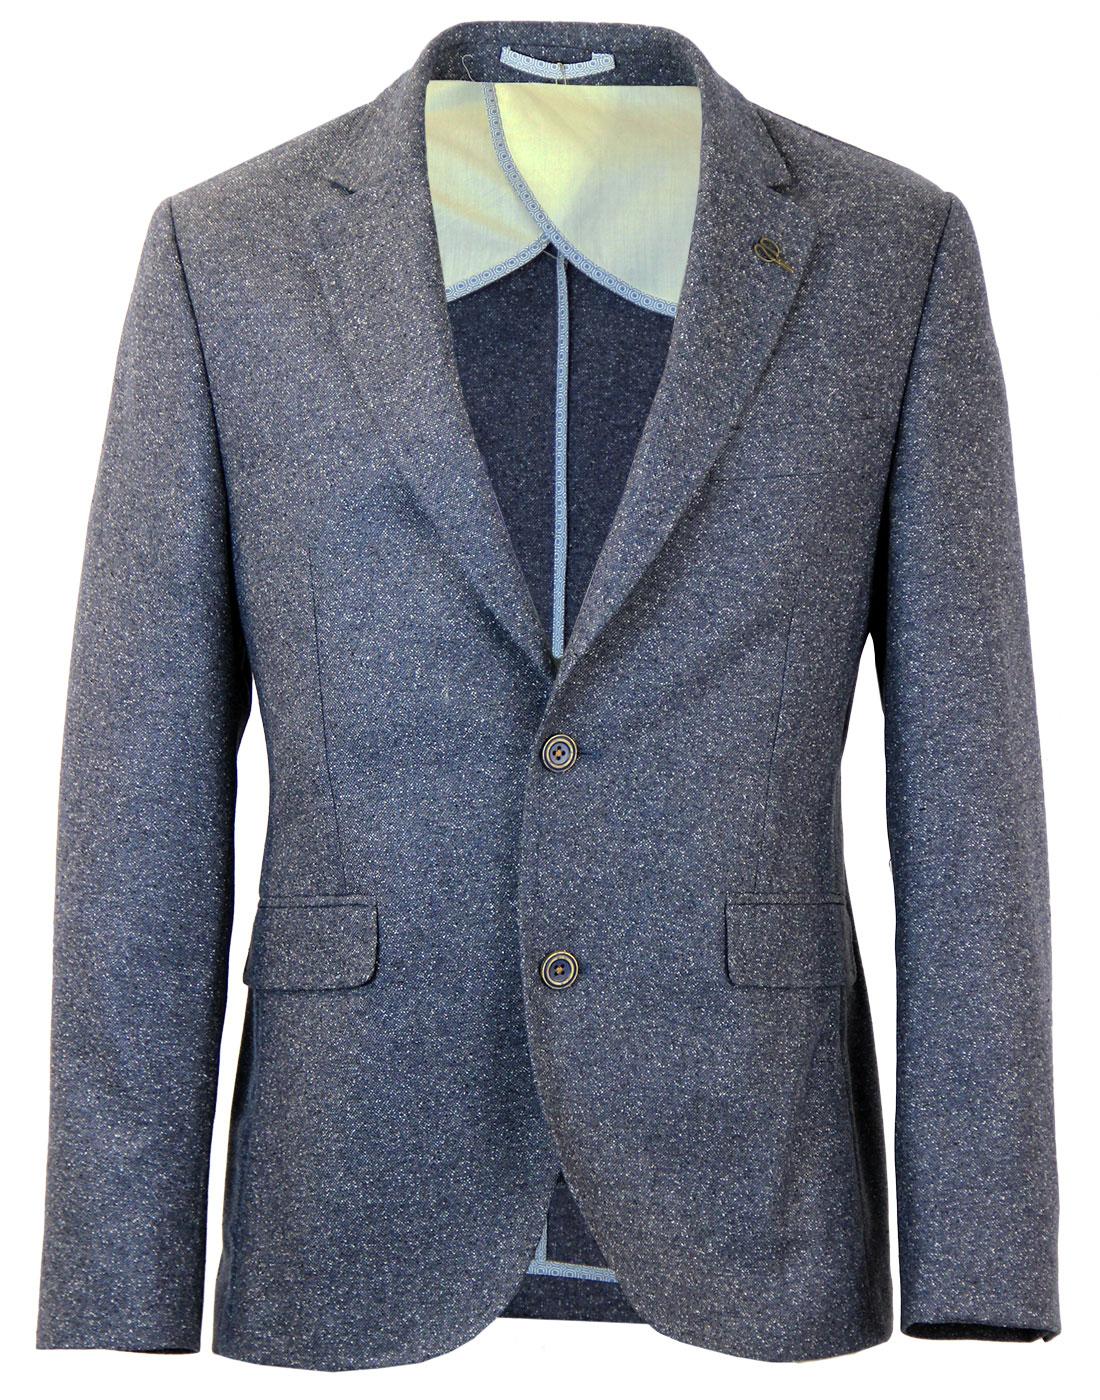 Gibson London Retro 60s Mod 3 Piece Suit in Blue Donegal.